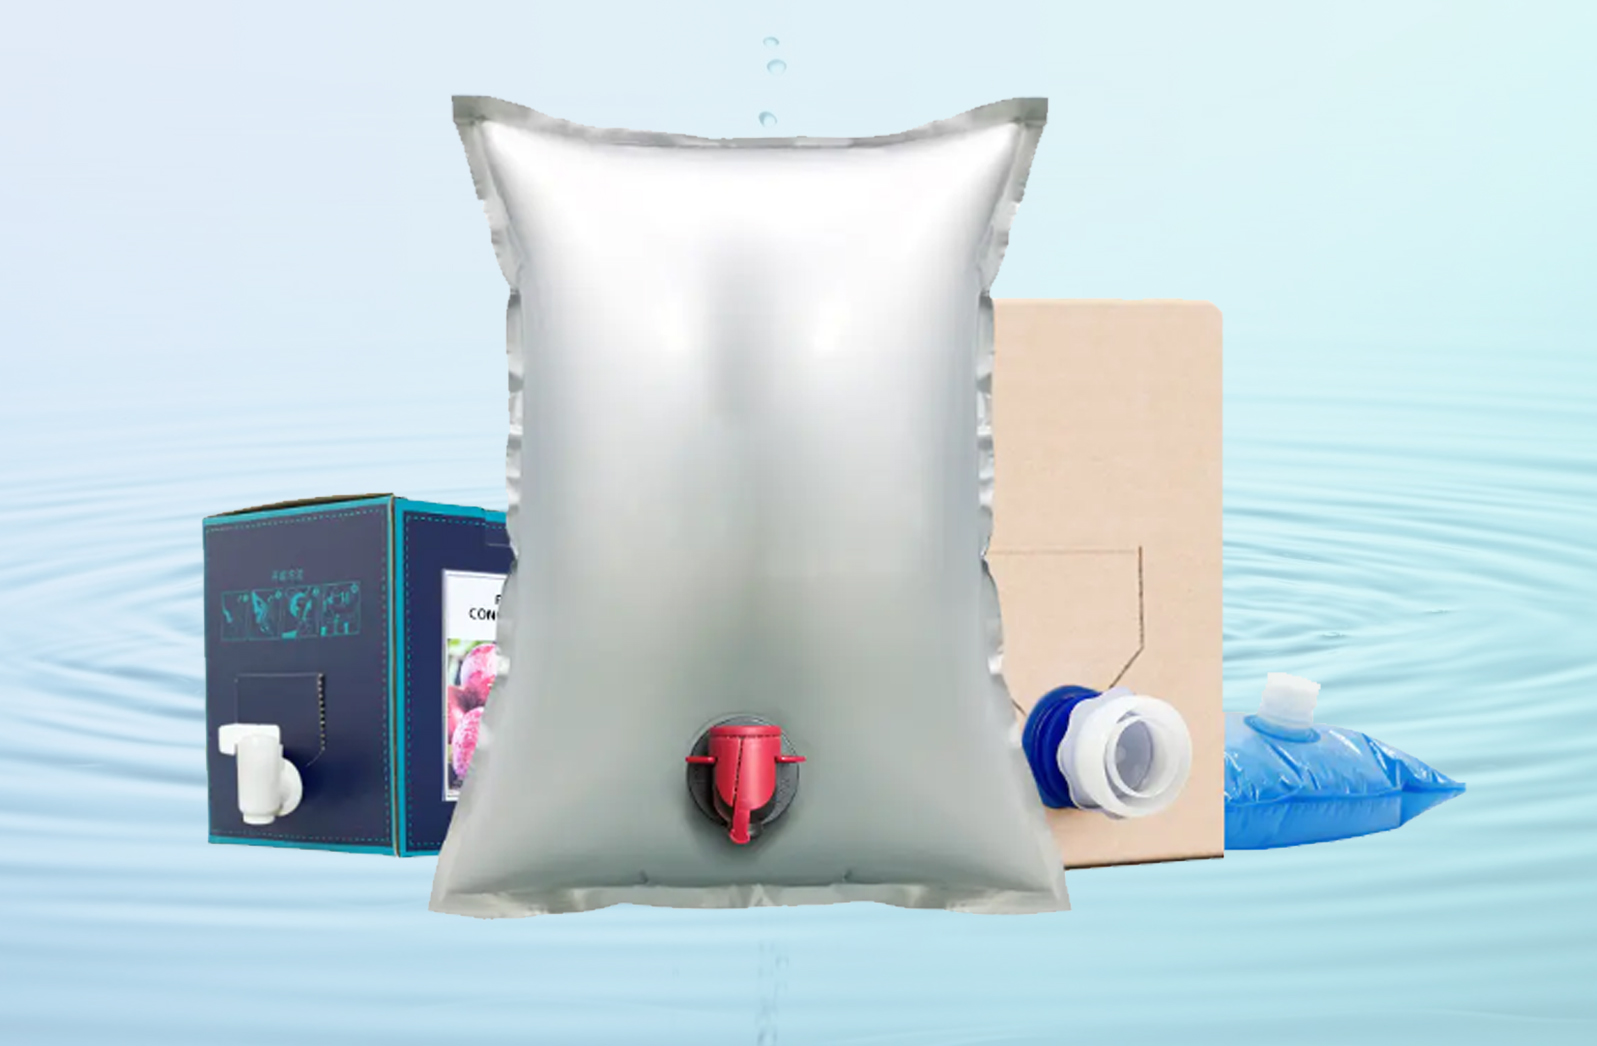 Wholesale Bag in Box Manufacturers: Revolutionizing Packaging Solutions